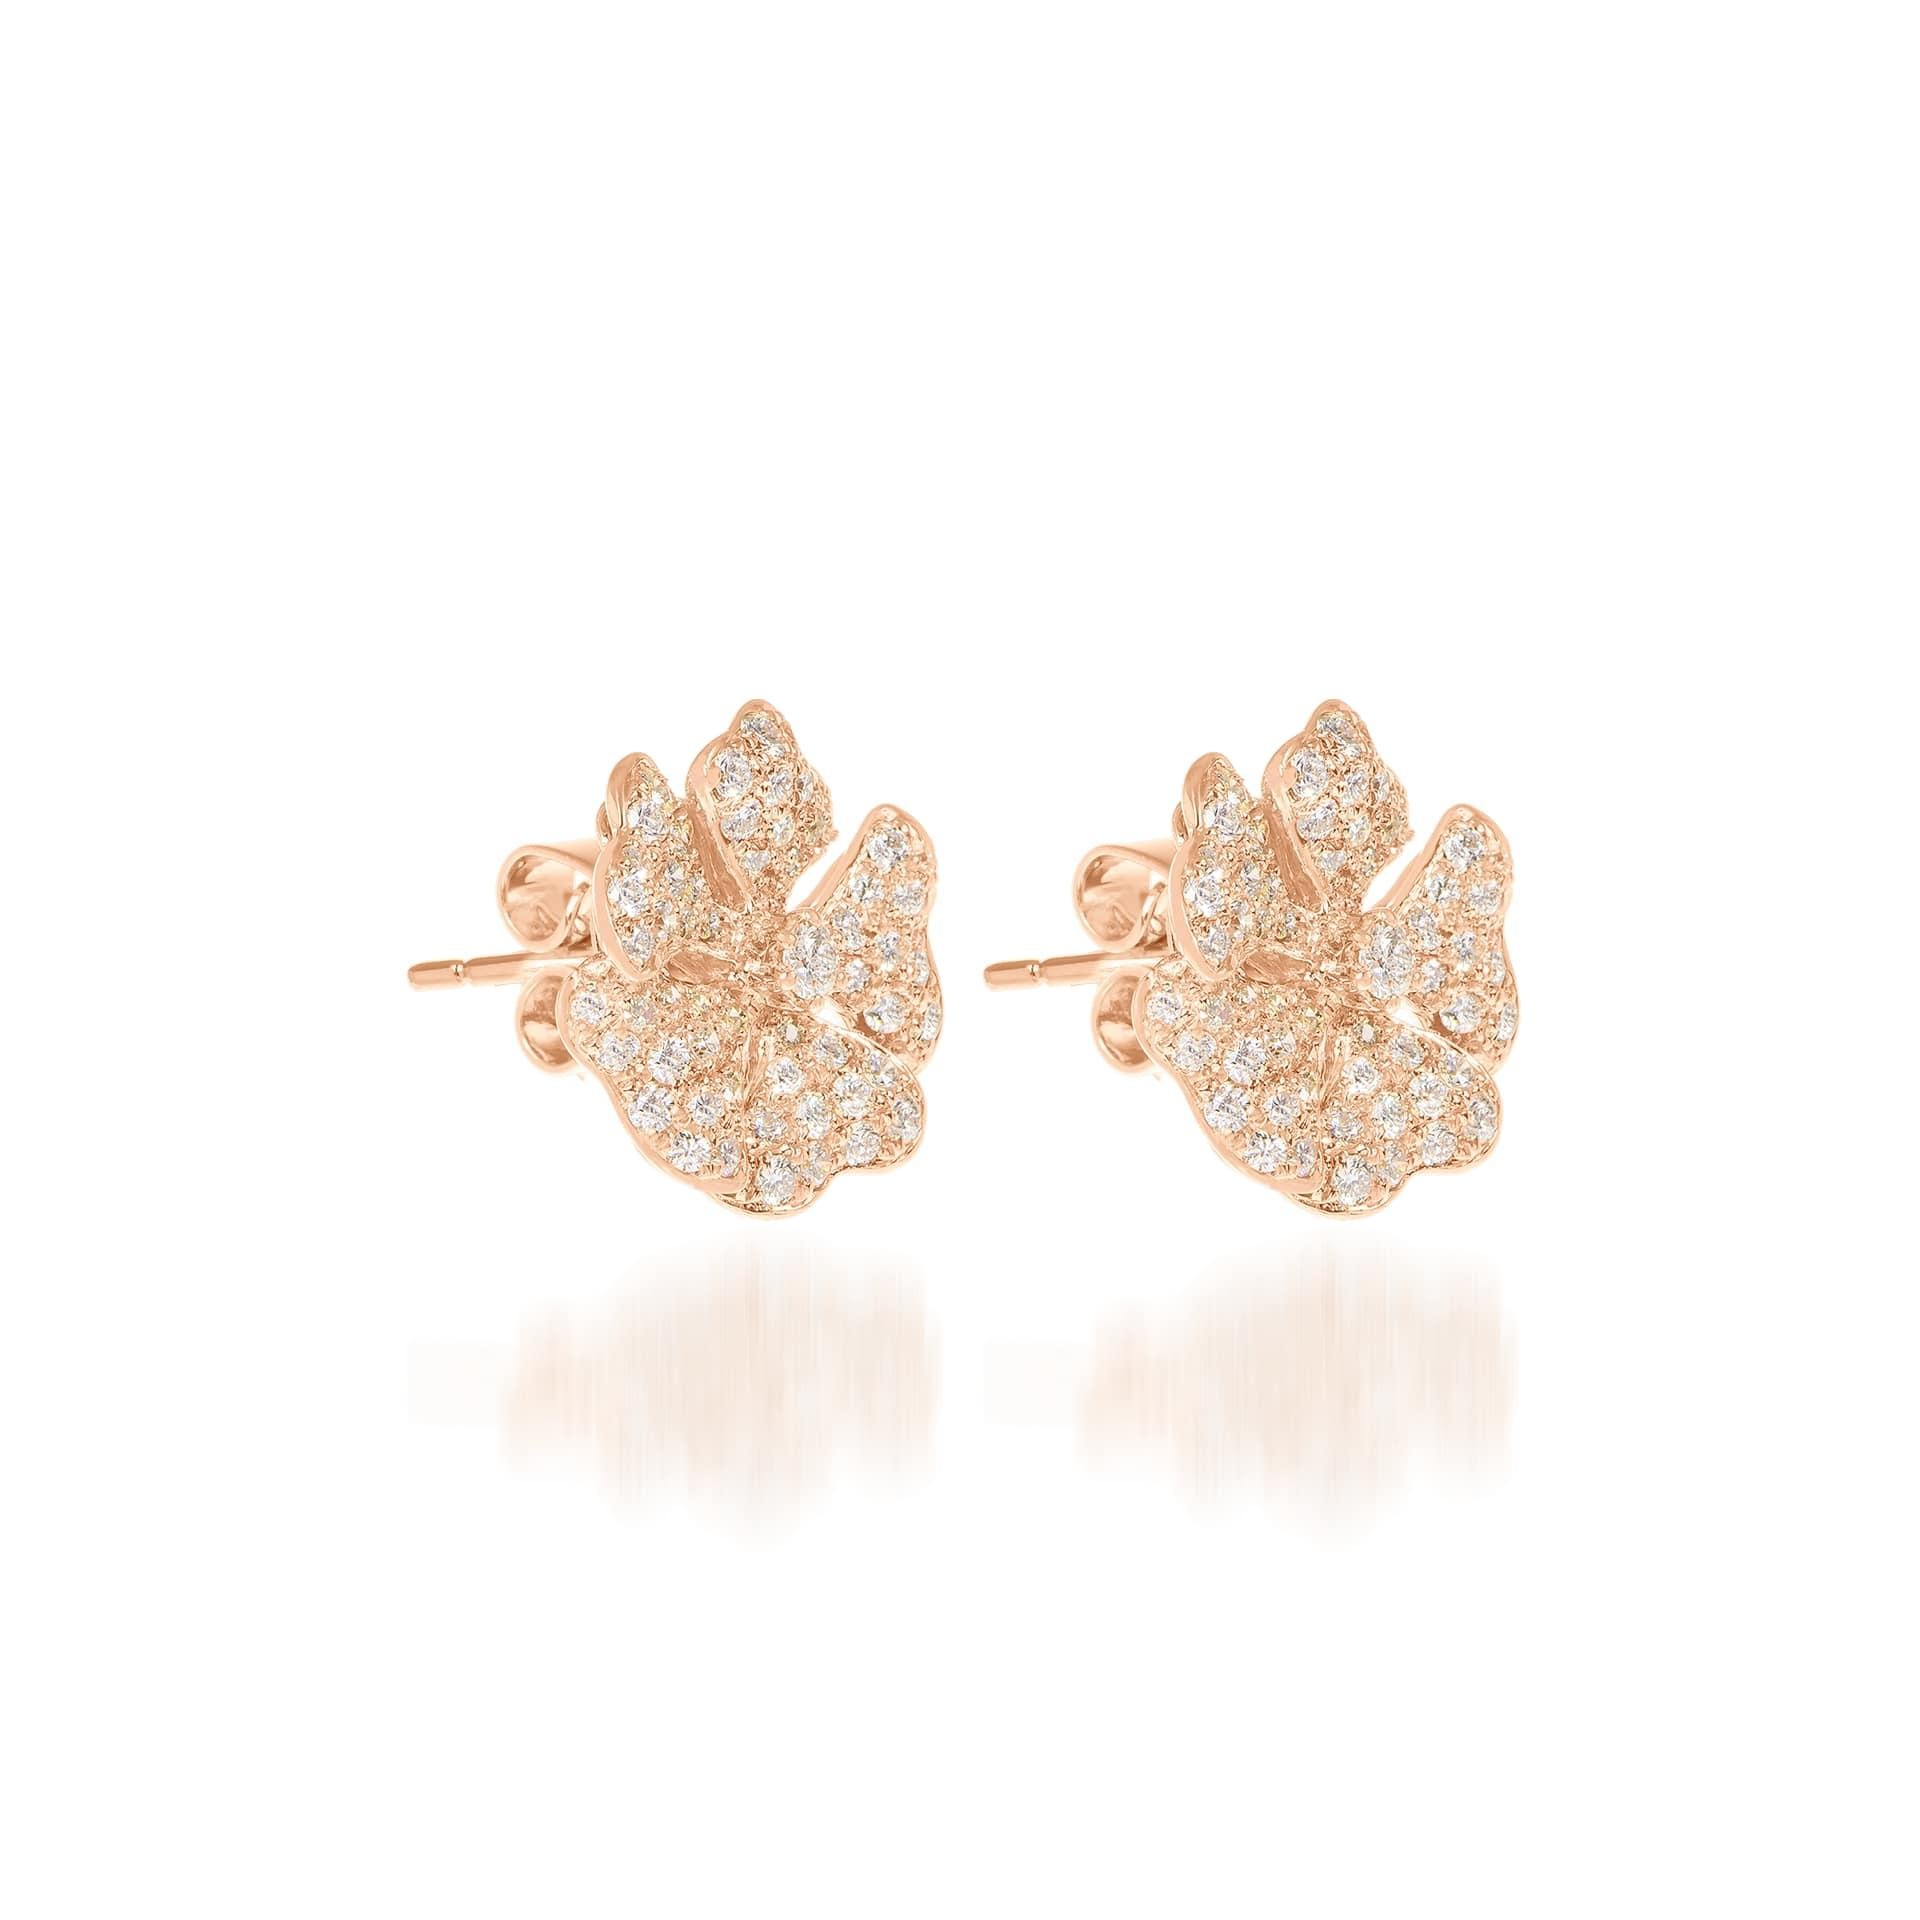 Bloom Gold and Pavé Diamond Small Stud Earrings in 18K Rose Gold

Inspired by the exquisite petals of the alpine cinquefoil flower, the Bloom collection combines the richness of diamonds and precious metals with the light versatility of this